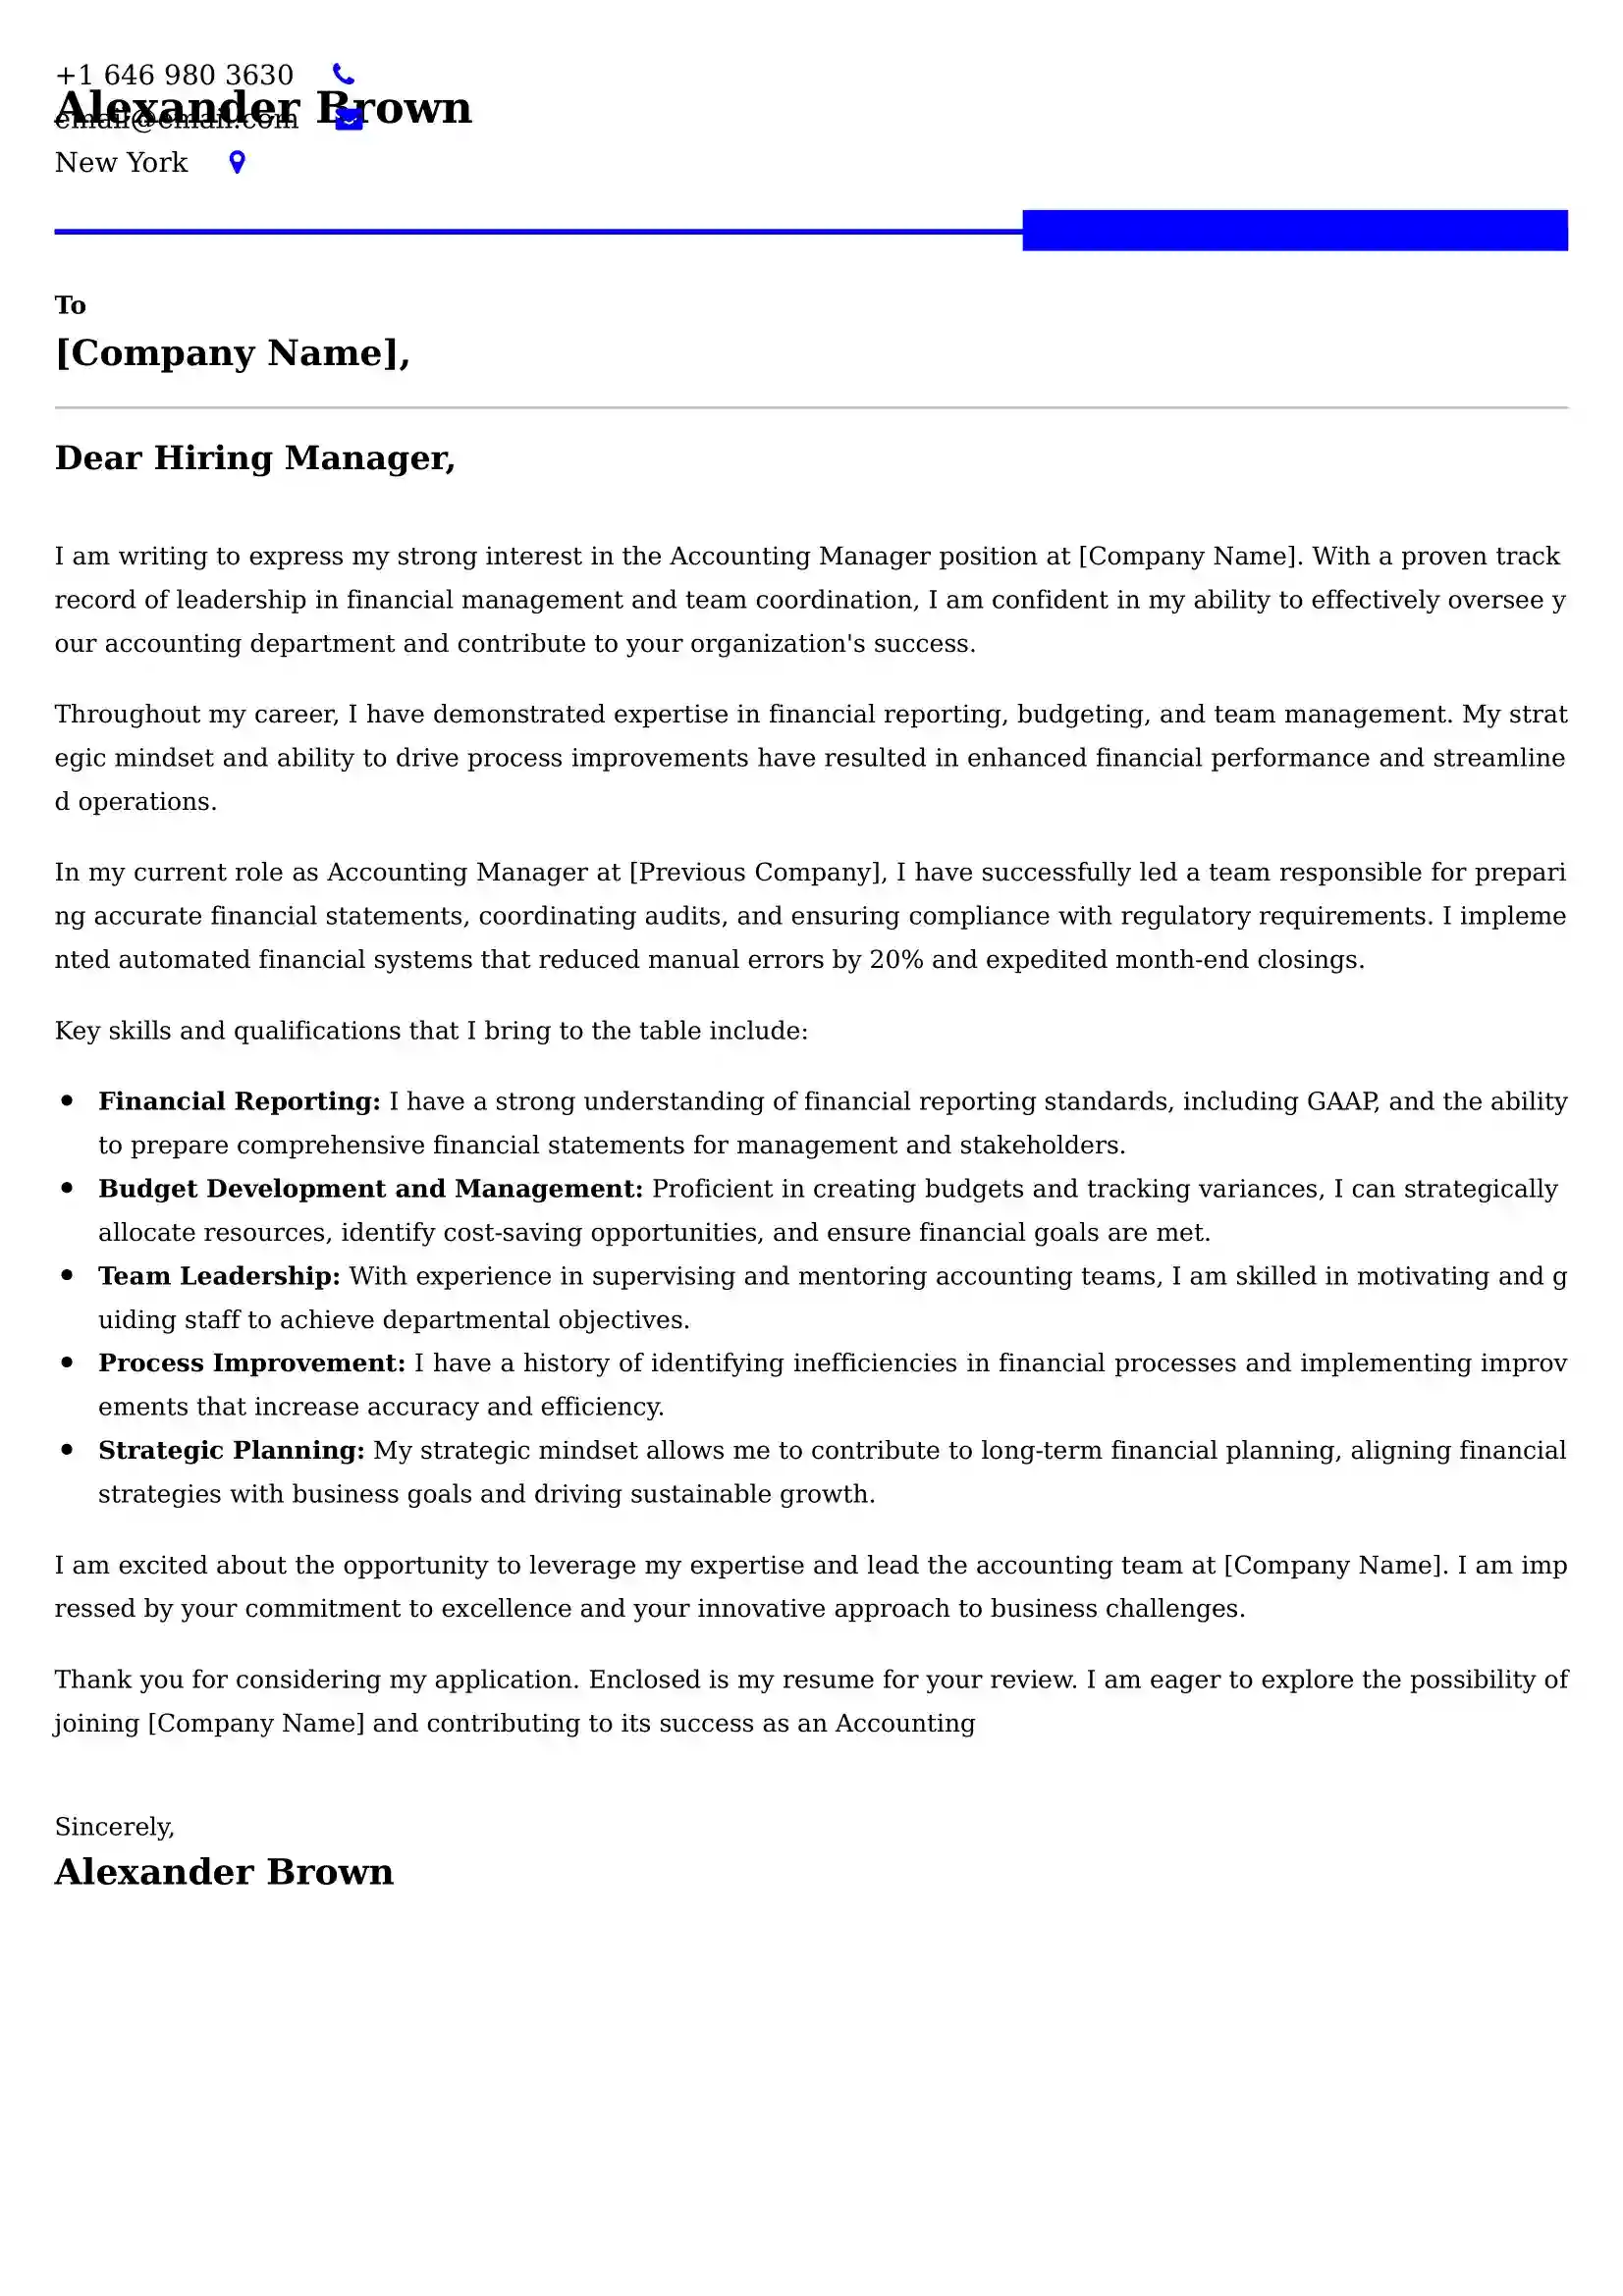 Accounting Manager Cover Letter Examples UK - Tips and Guide